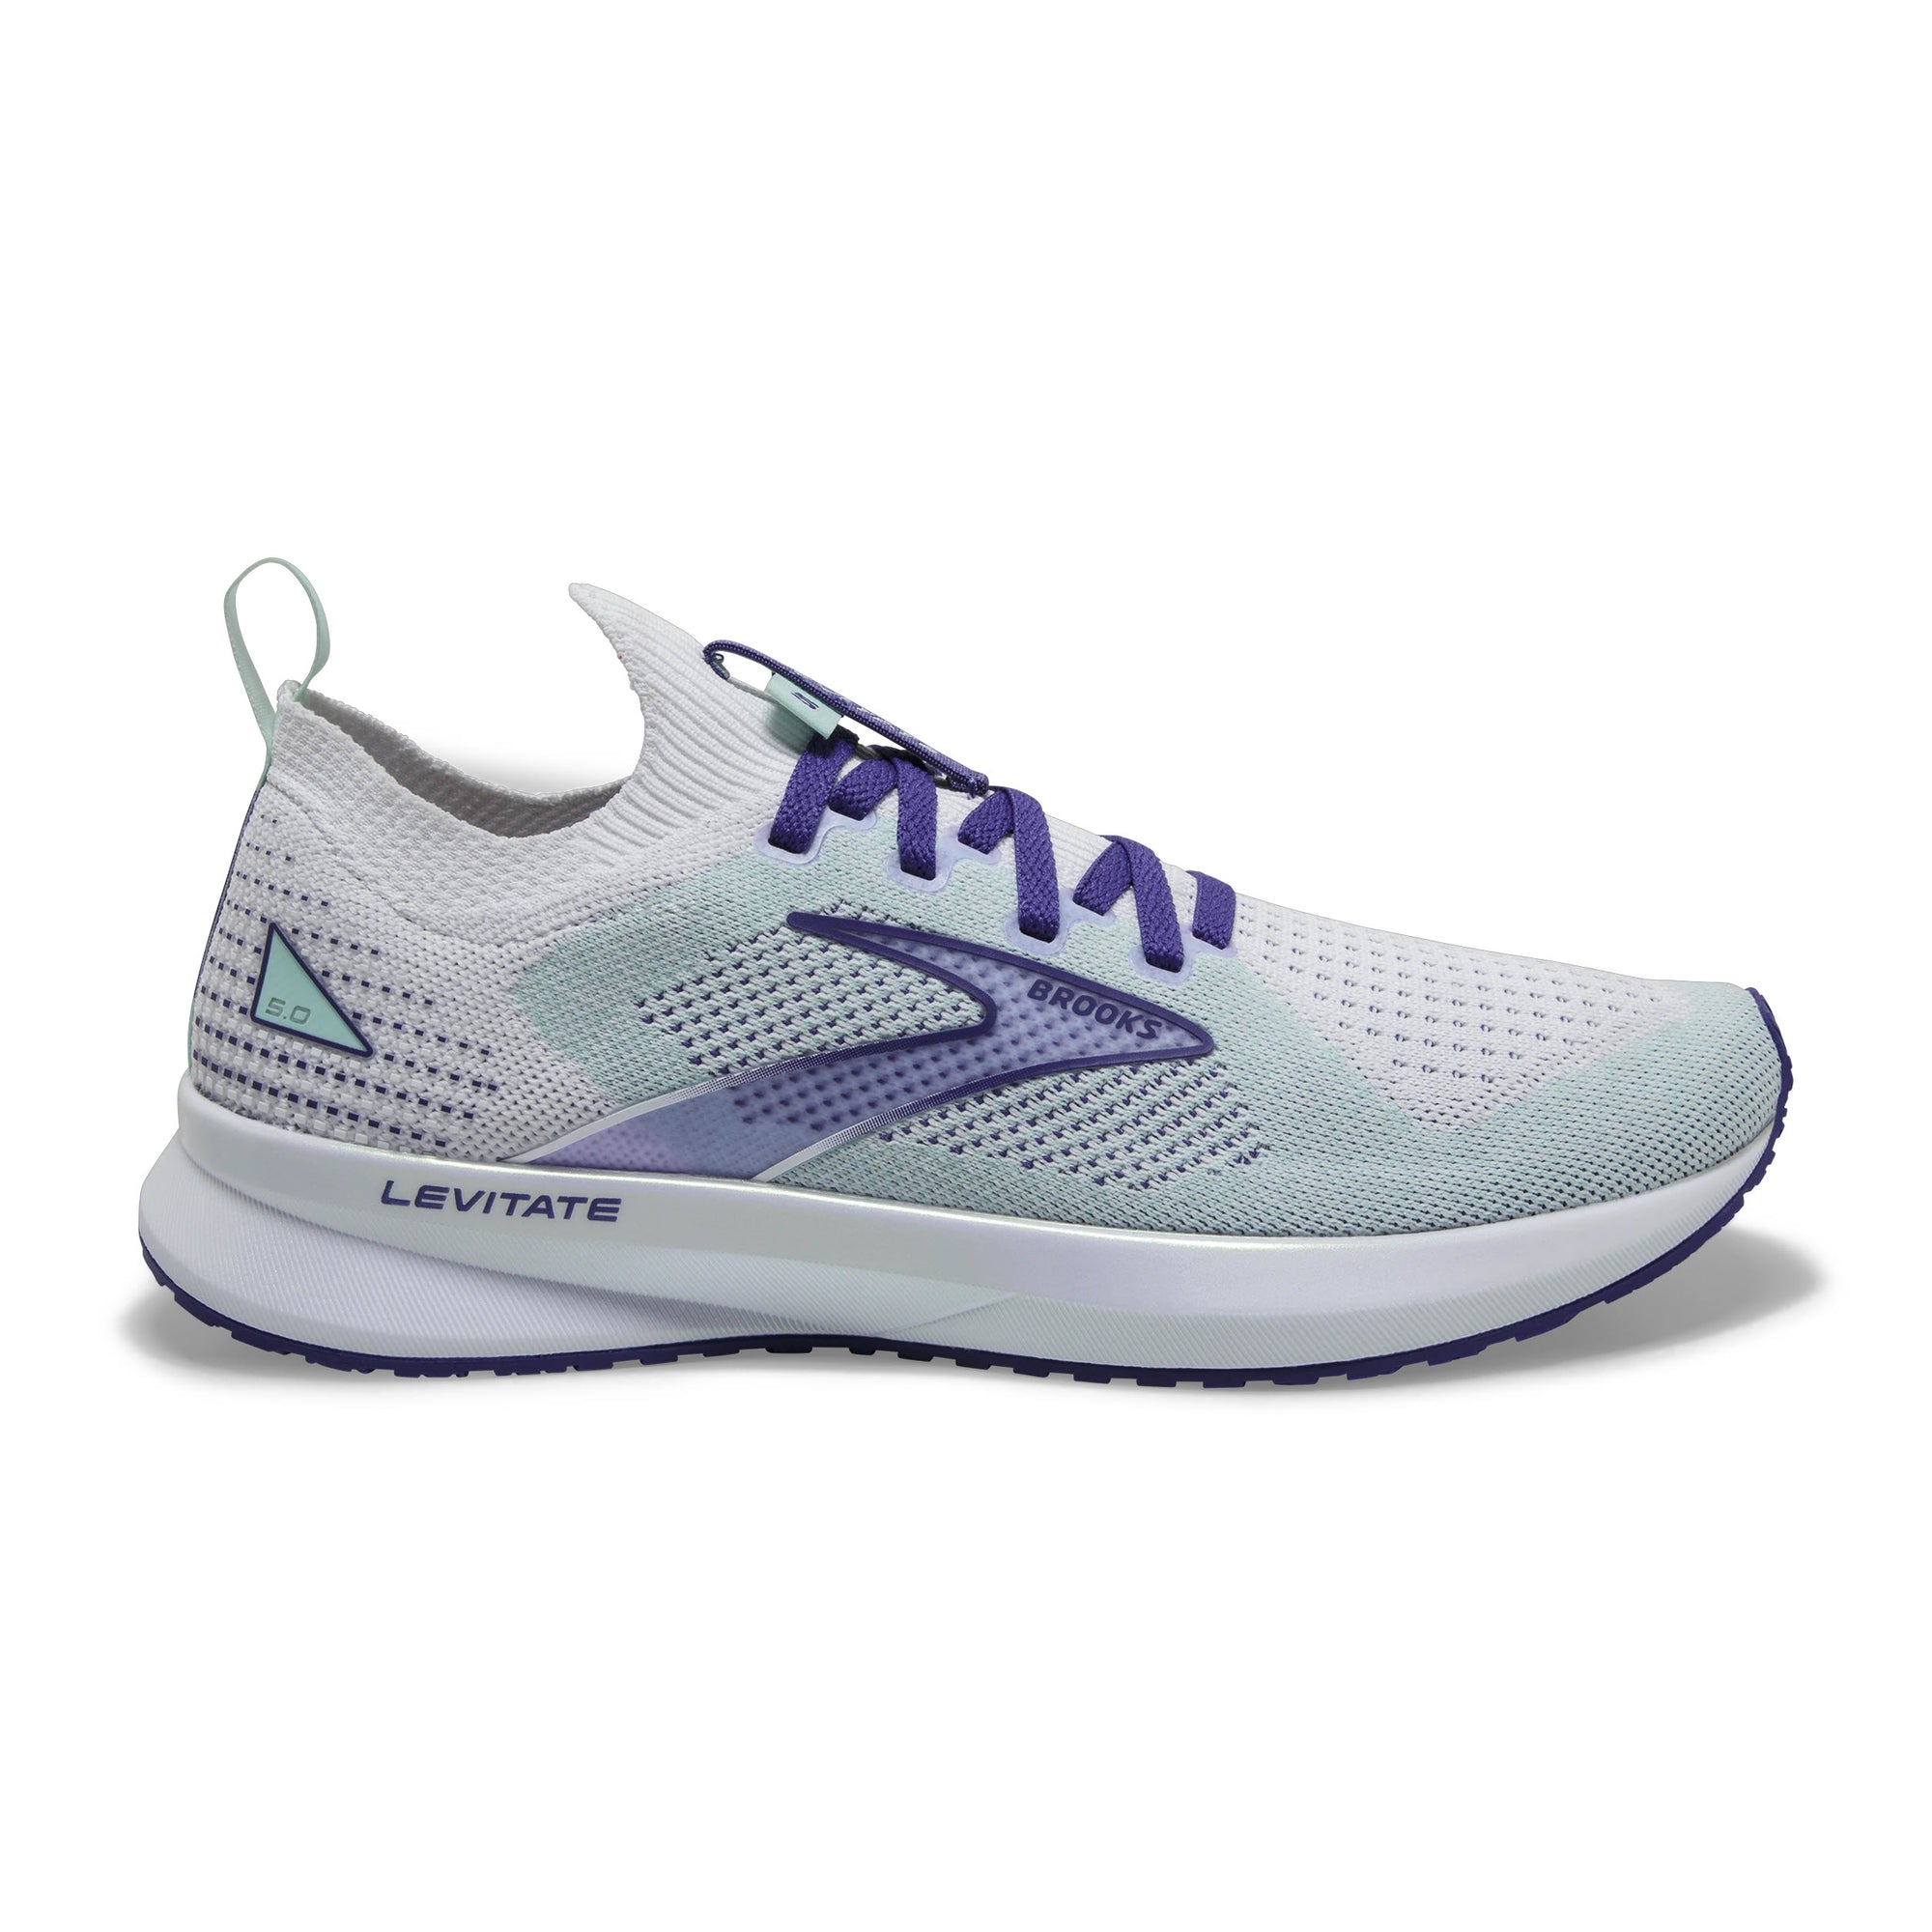 A single BROOKS LEVITATE STEALTHFIT 5 WHITE/NAVY BLUE/YUCCA - WOMENS running shoe, featuring DNA AMP cushioning.